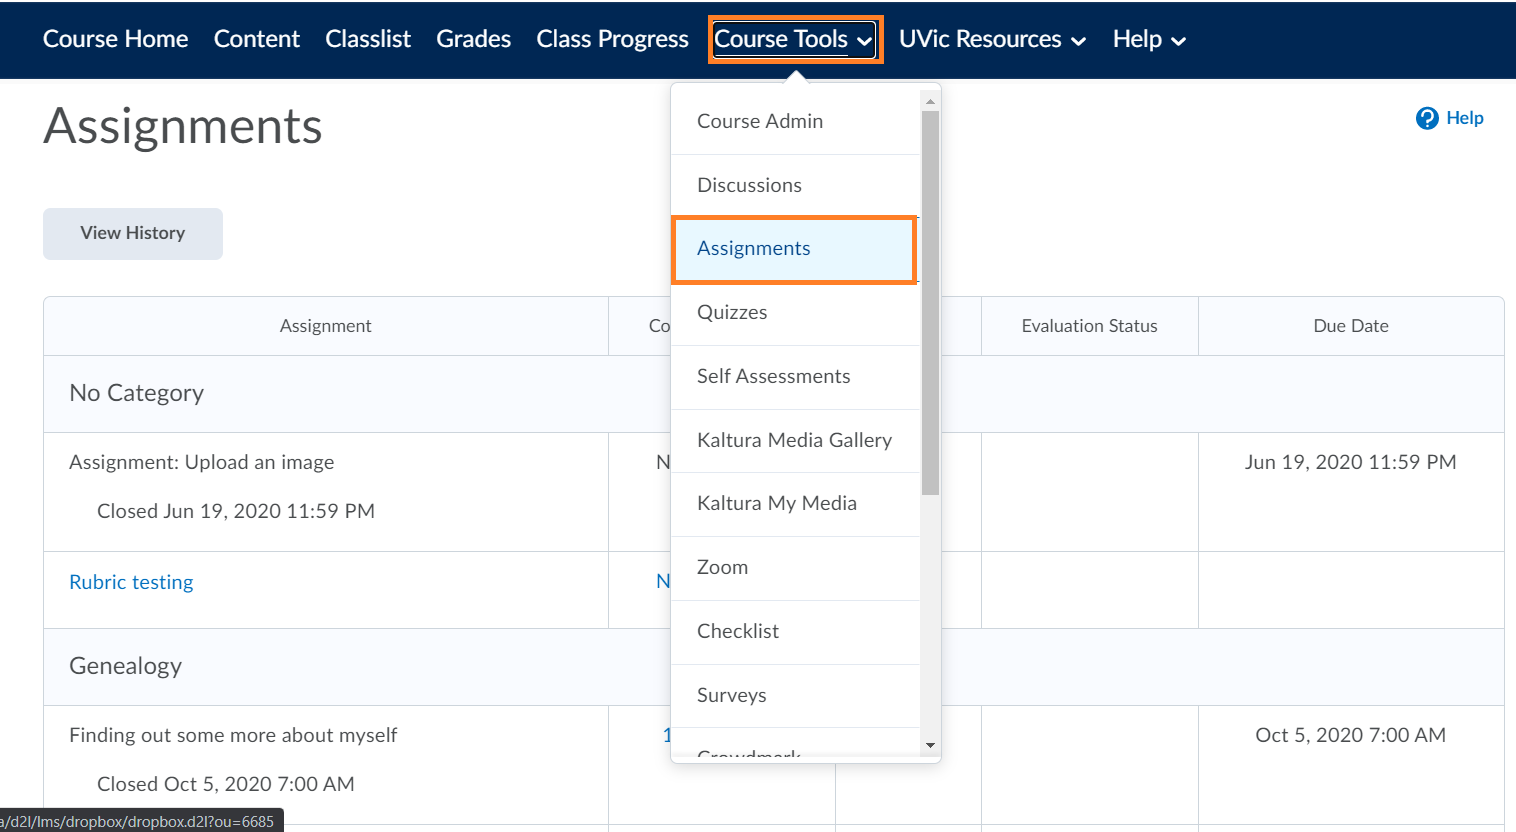 Assignments is the third option under the Course Tools tab. The Course Tools tab is in the navigation bar at the top after "Class progress" and before "UVic Resources".